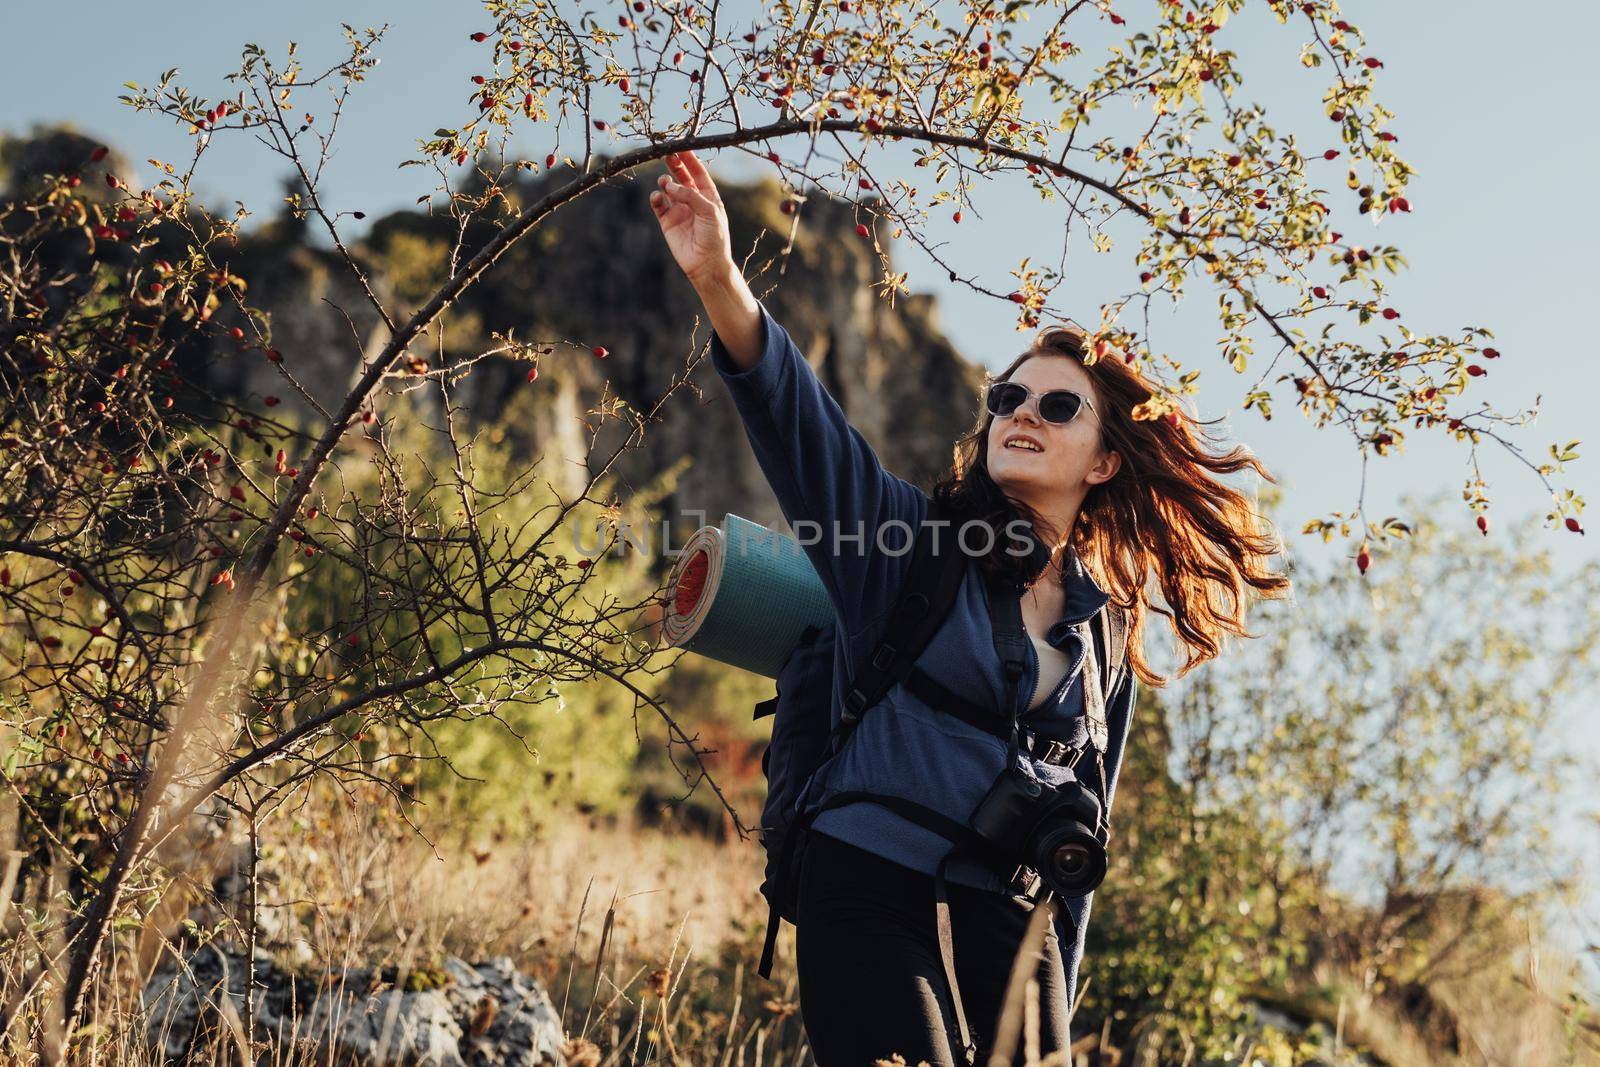 Cheerful Young Travel Woman in Sunglasses With Backpack with Camping Mat and Digital Camera on Strap Making Her Way Through the Thickets During Her Hike